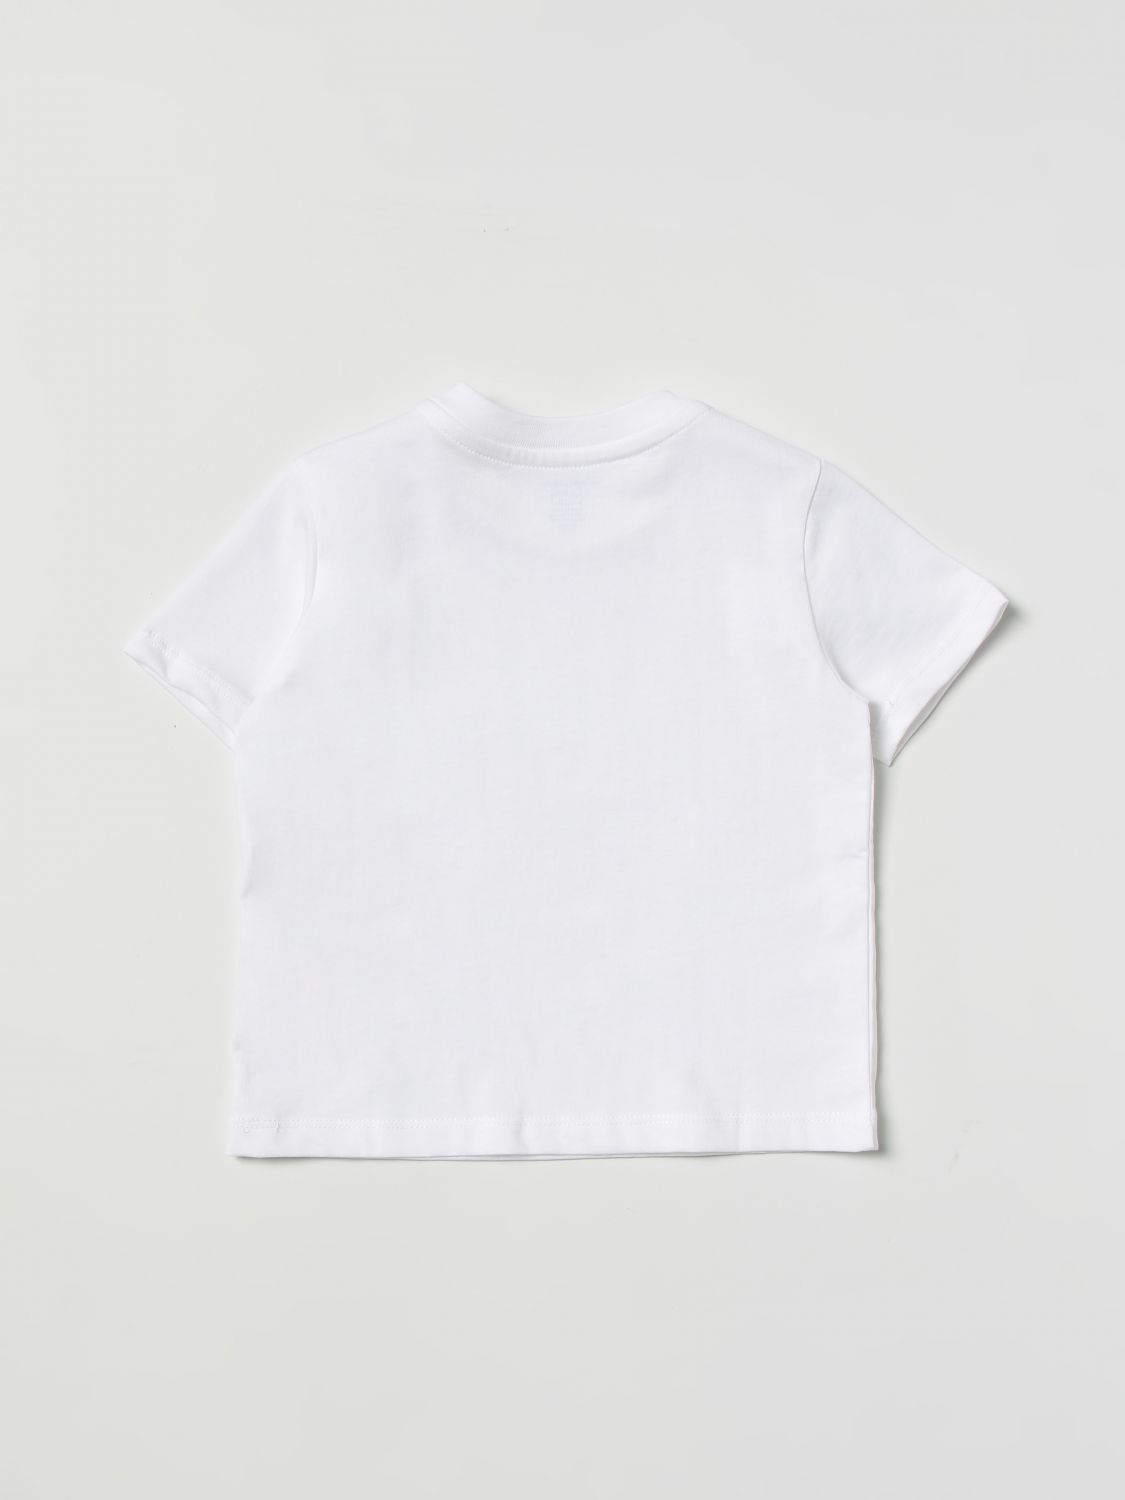 POLO RALPH LAUREN: t-shirt for baby - White | Polo Ralph Lauren t-shirt ...